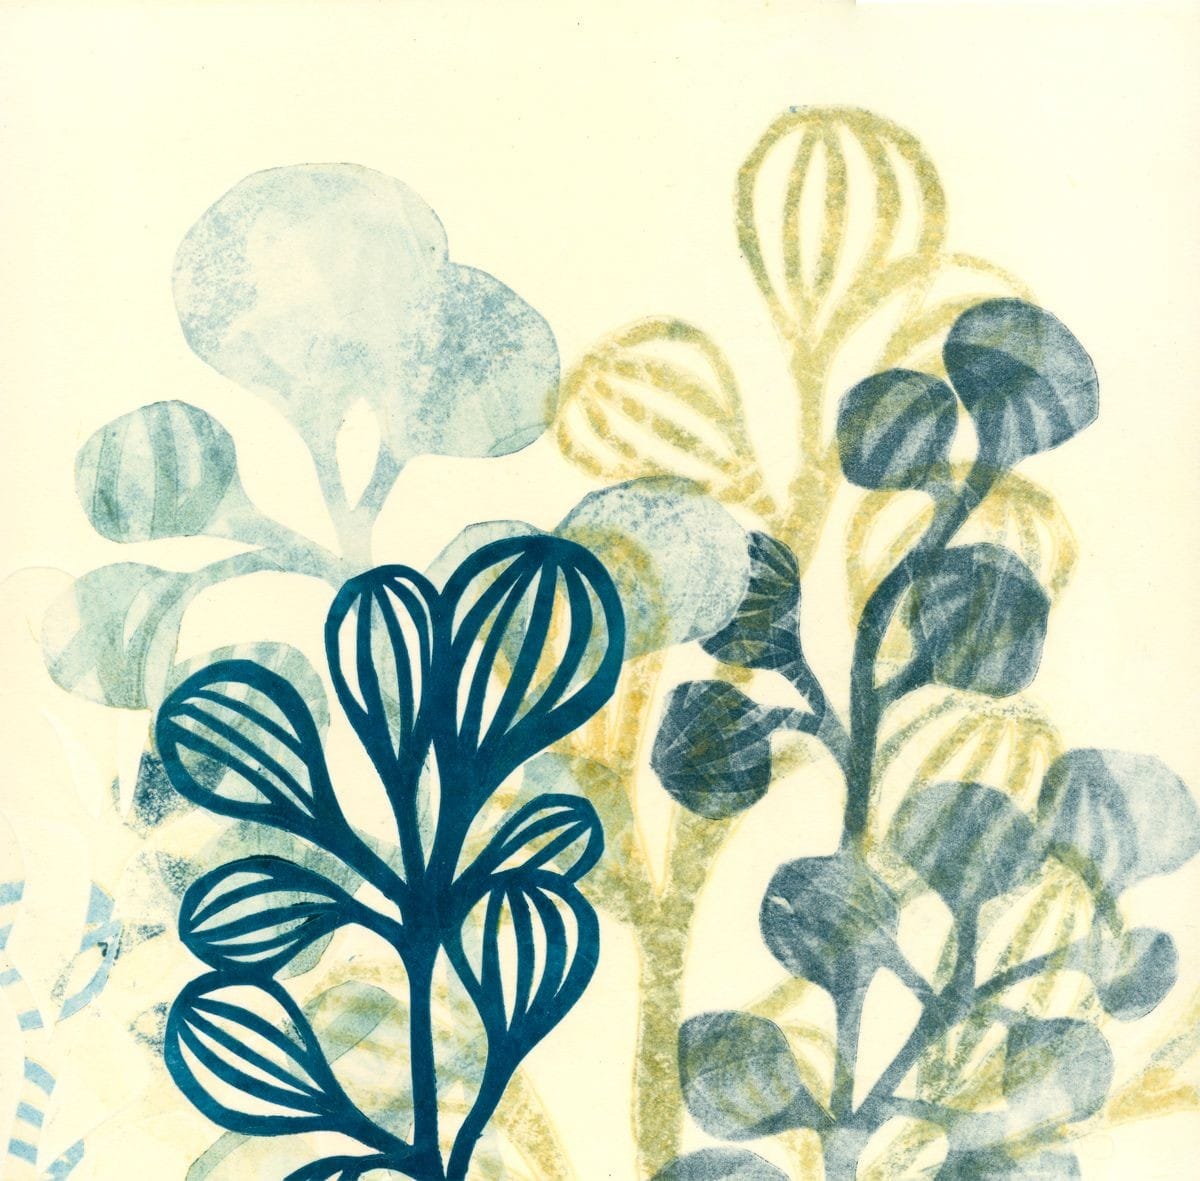 Botanical monoprint in yellow, white and blue using drypoint and collagraph techniques